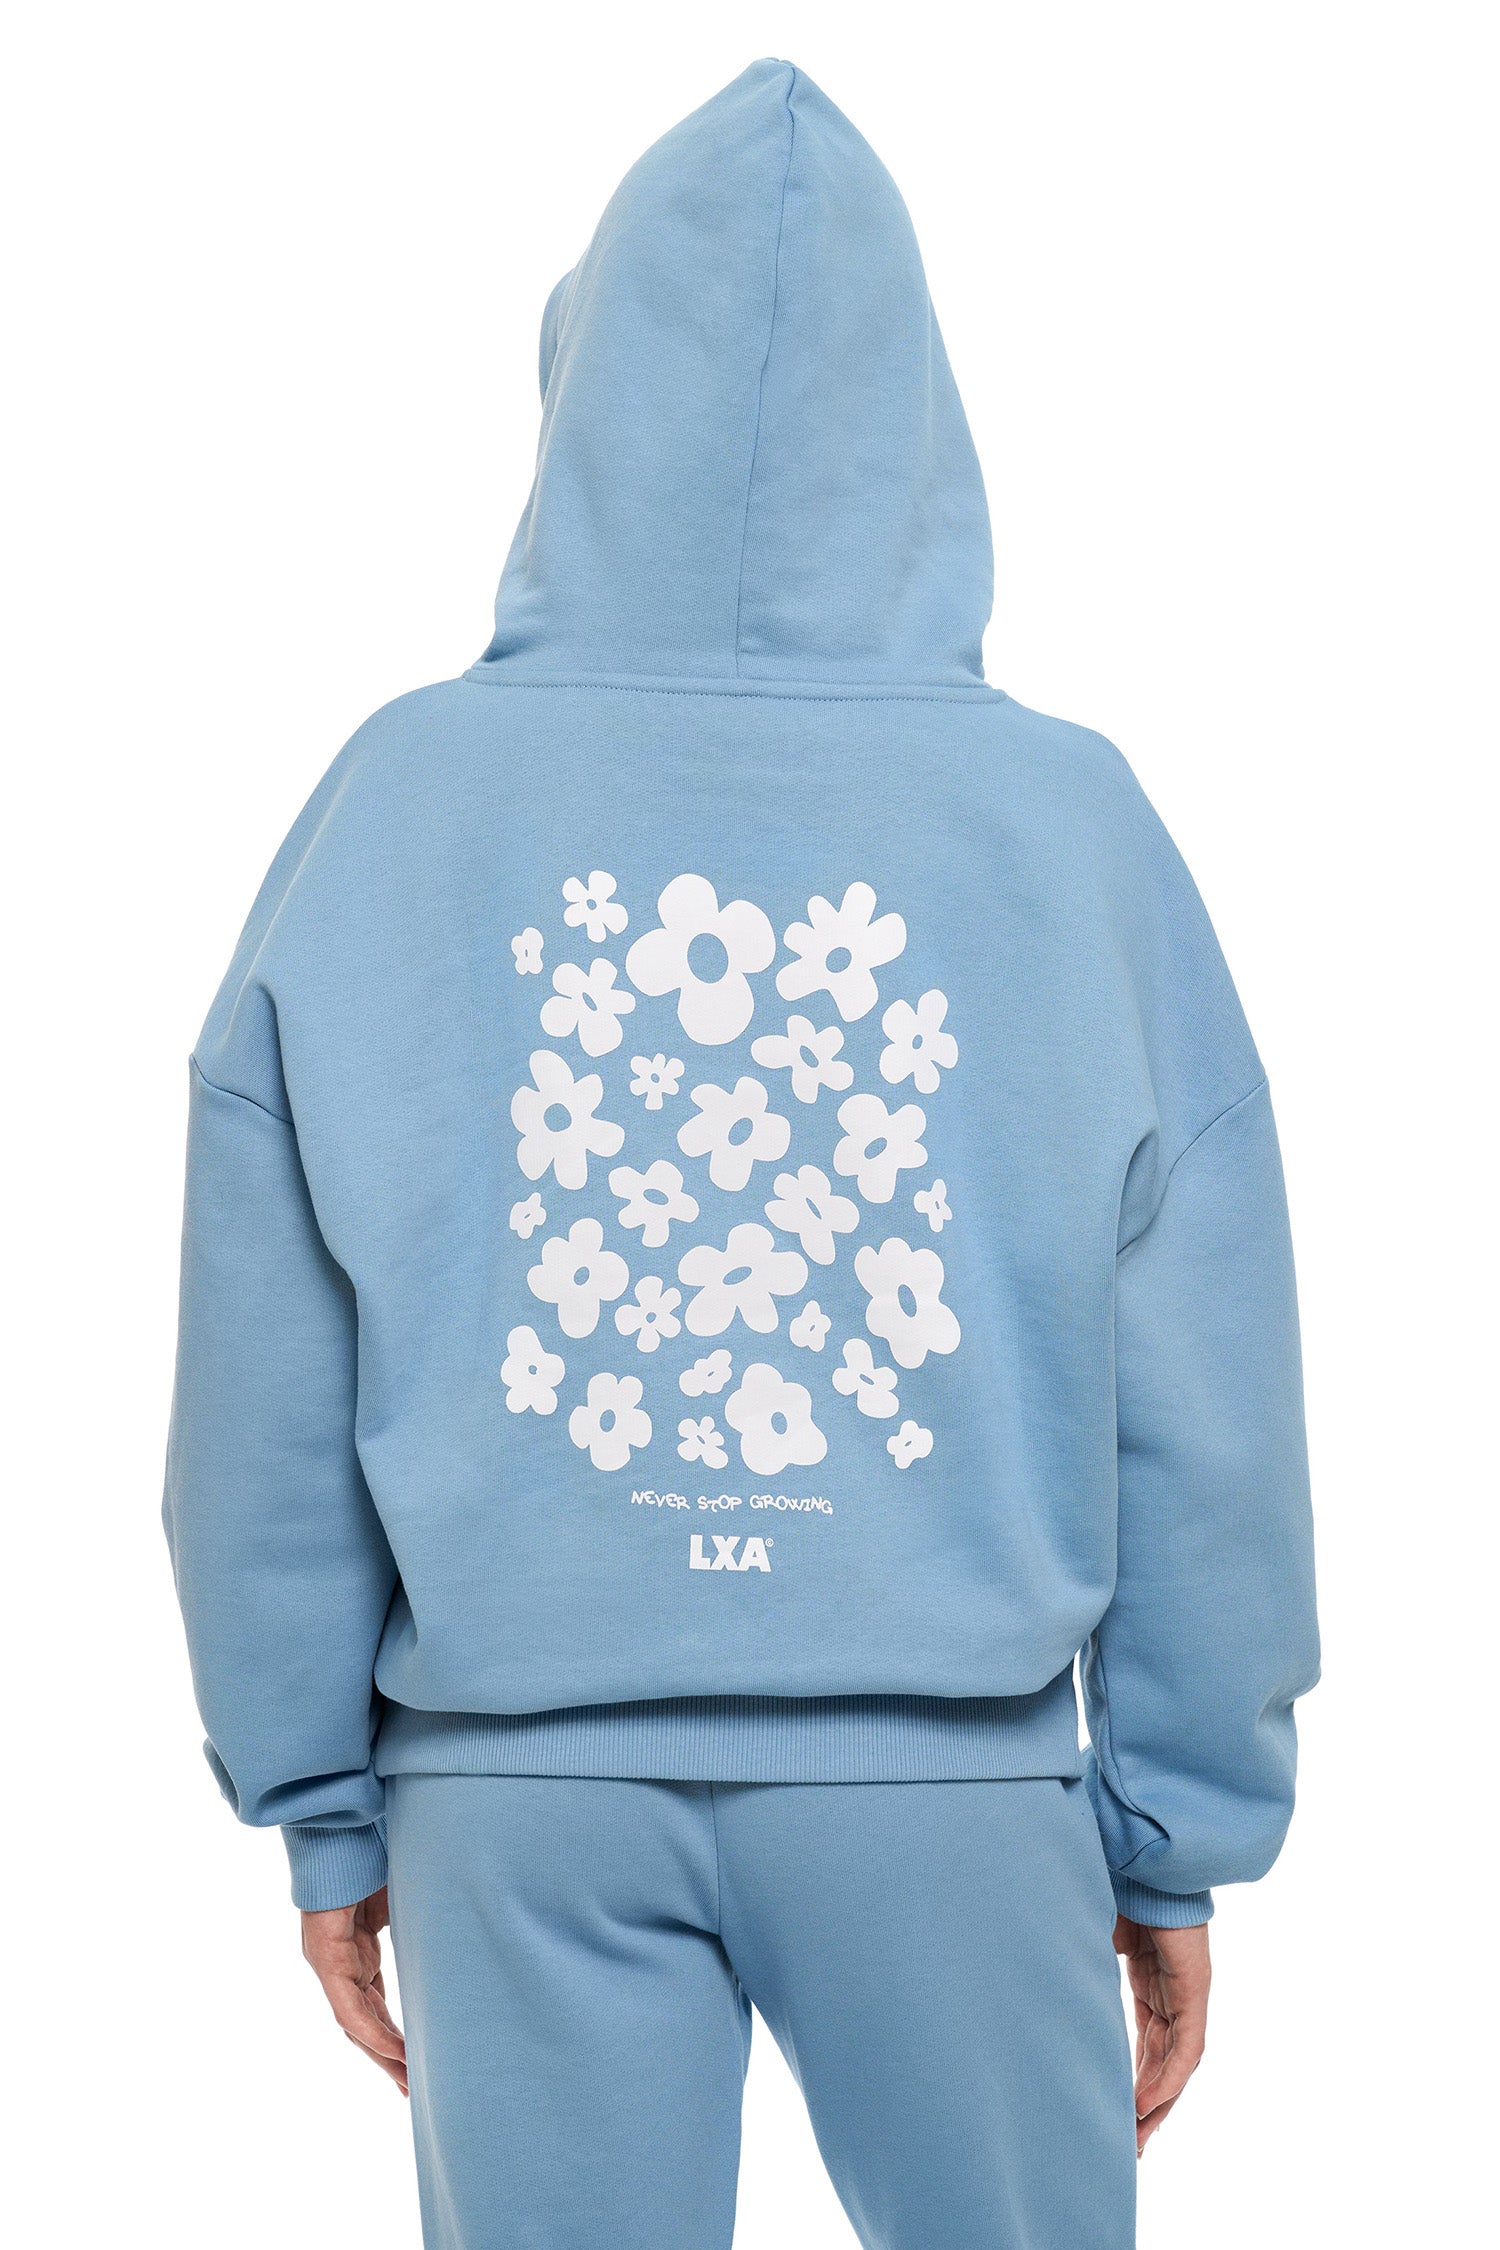 HOODIE - FADED BLUE – LXA THE LABEL